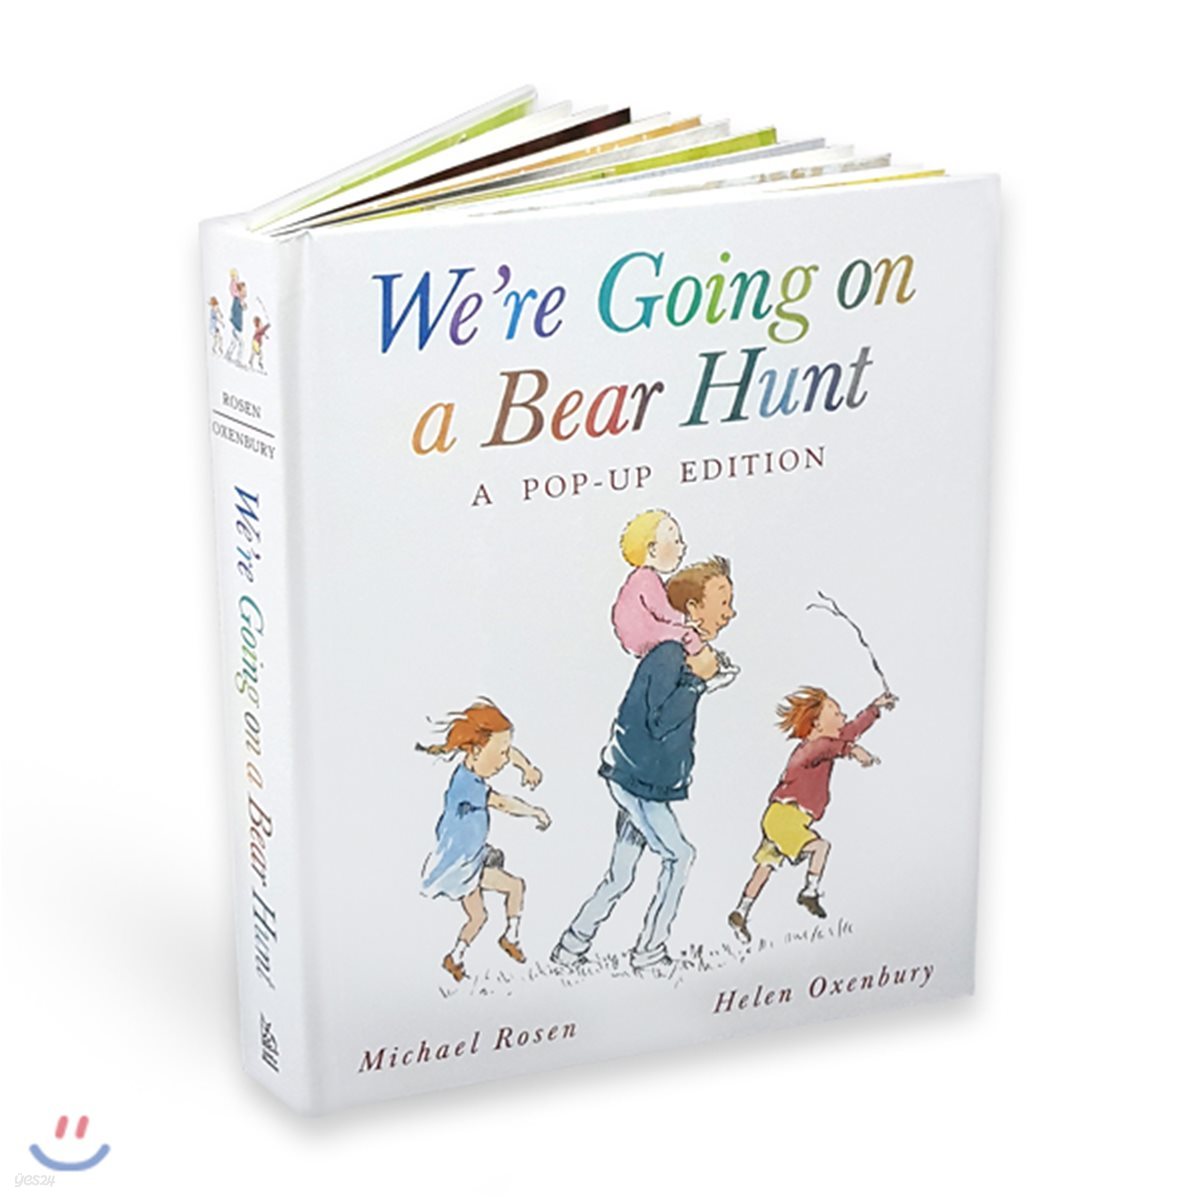 We're Going on a Bear Hunt: A Celebratory Pop-Up Edition